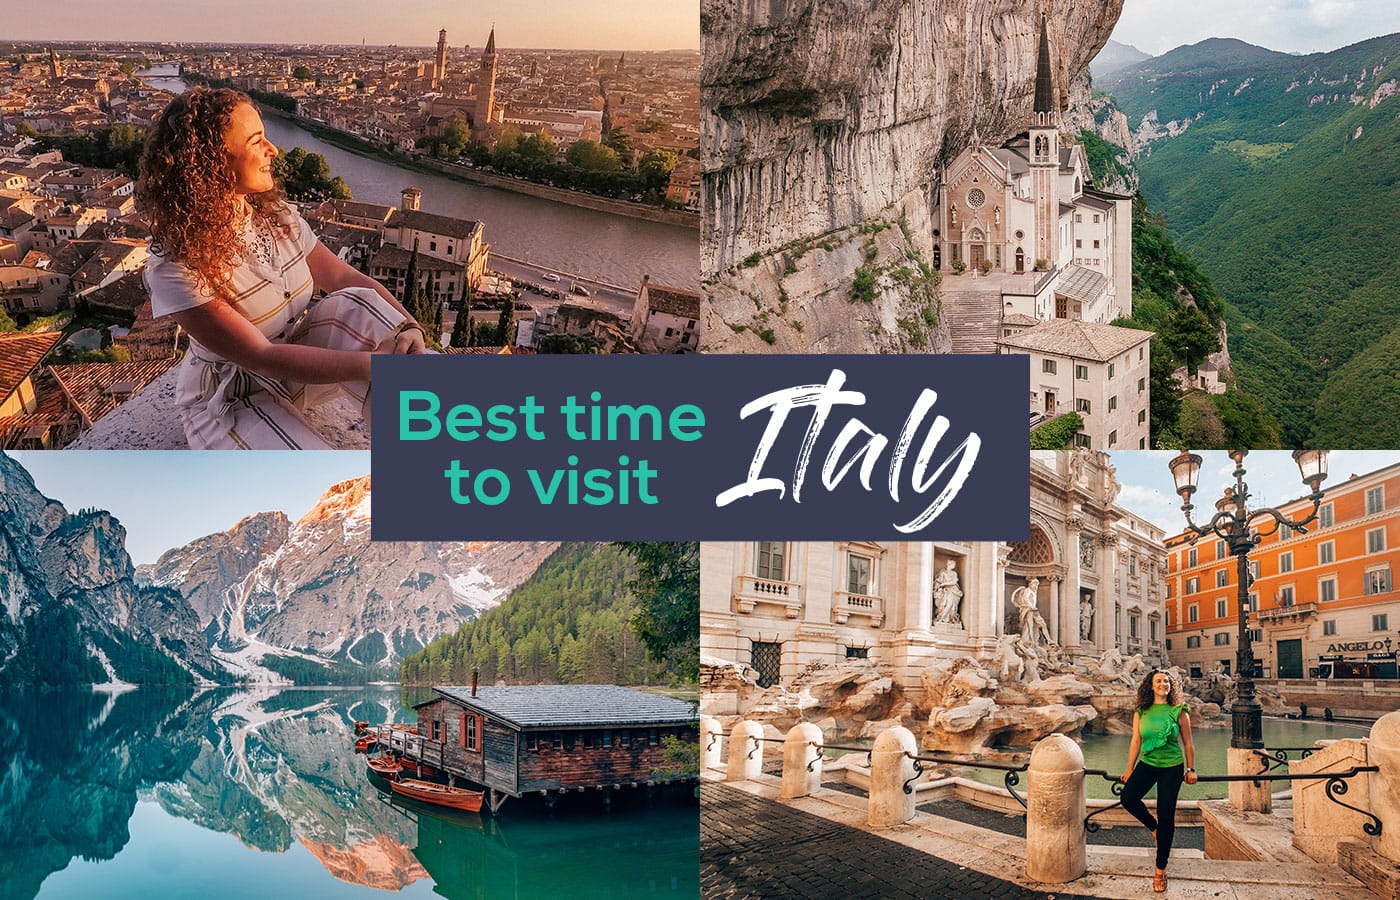 The Best Time to Visit Italy